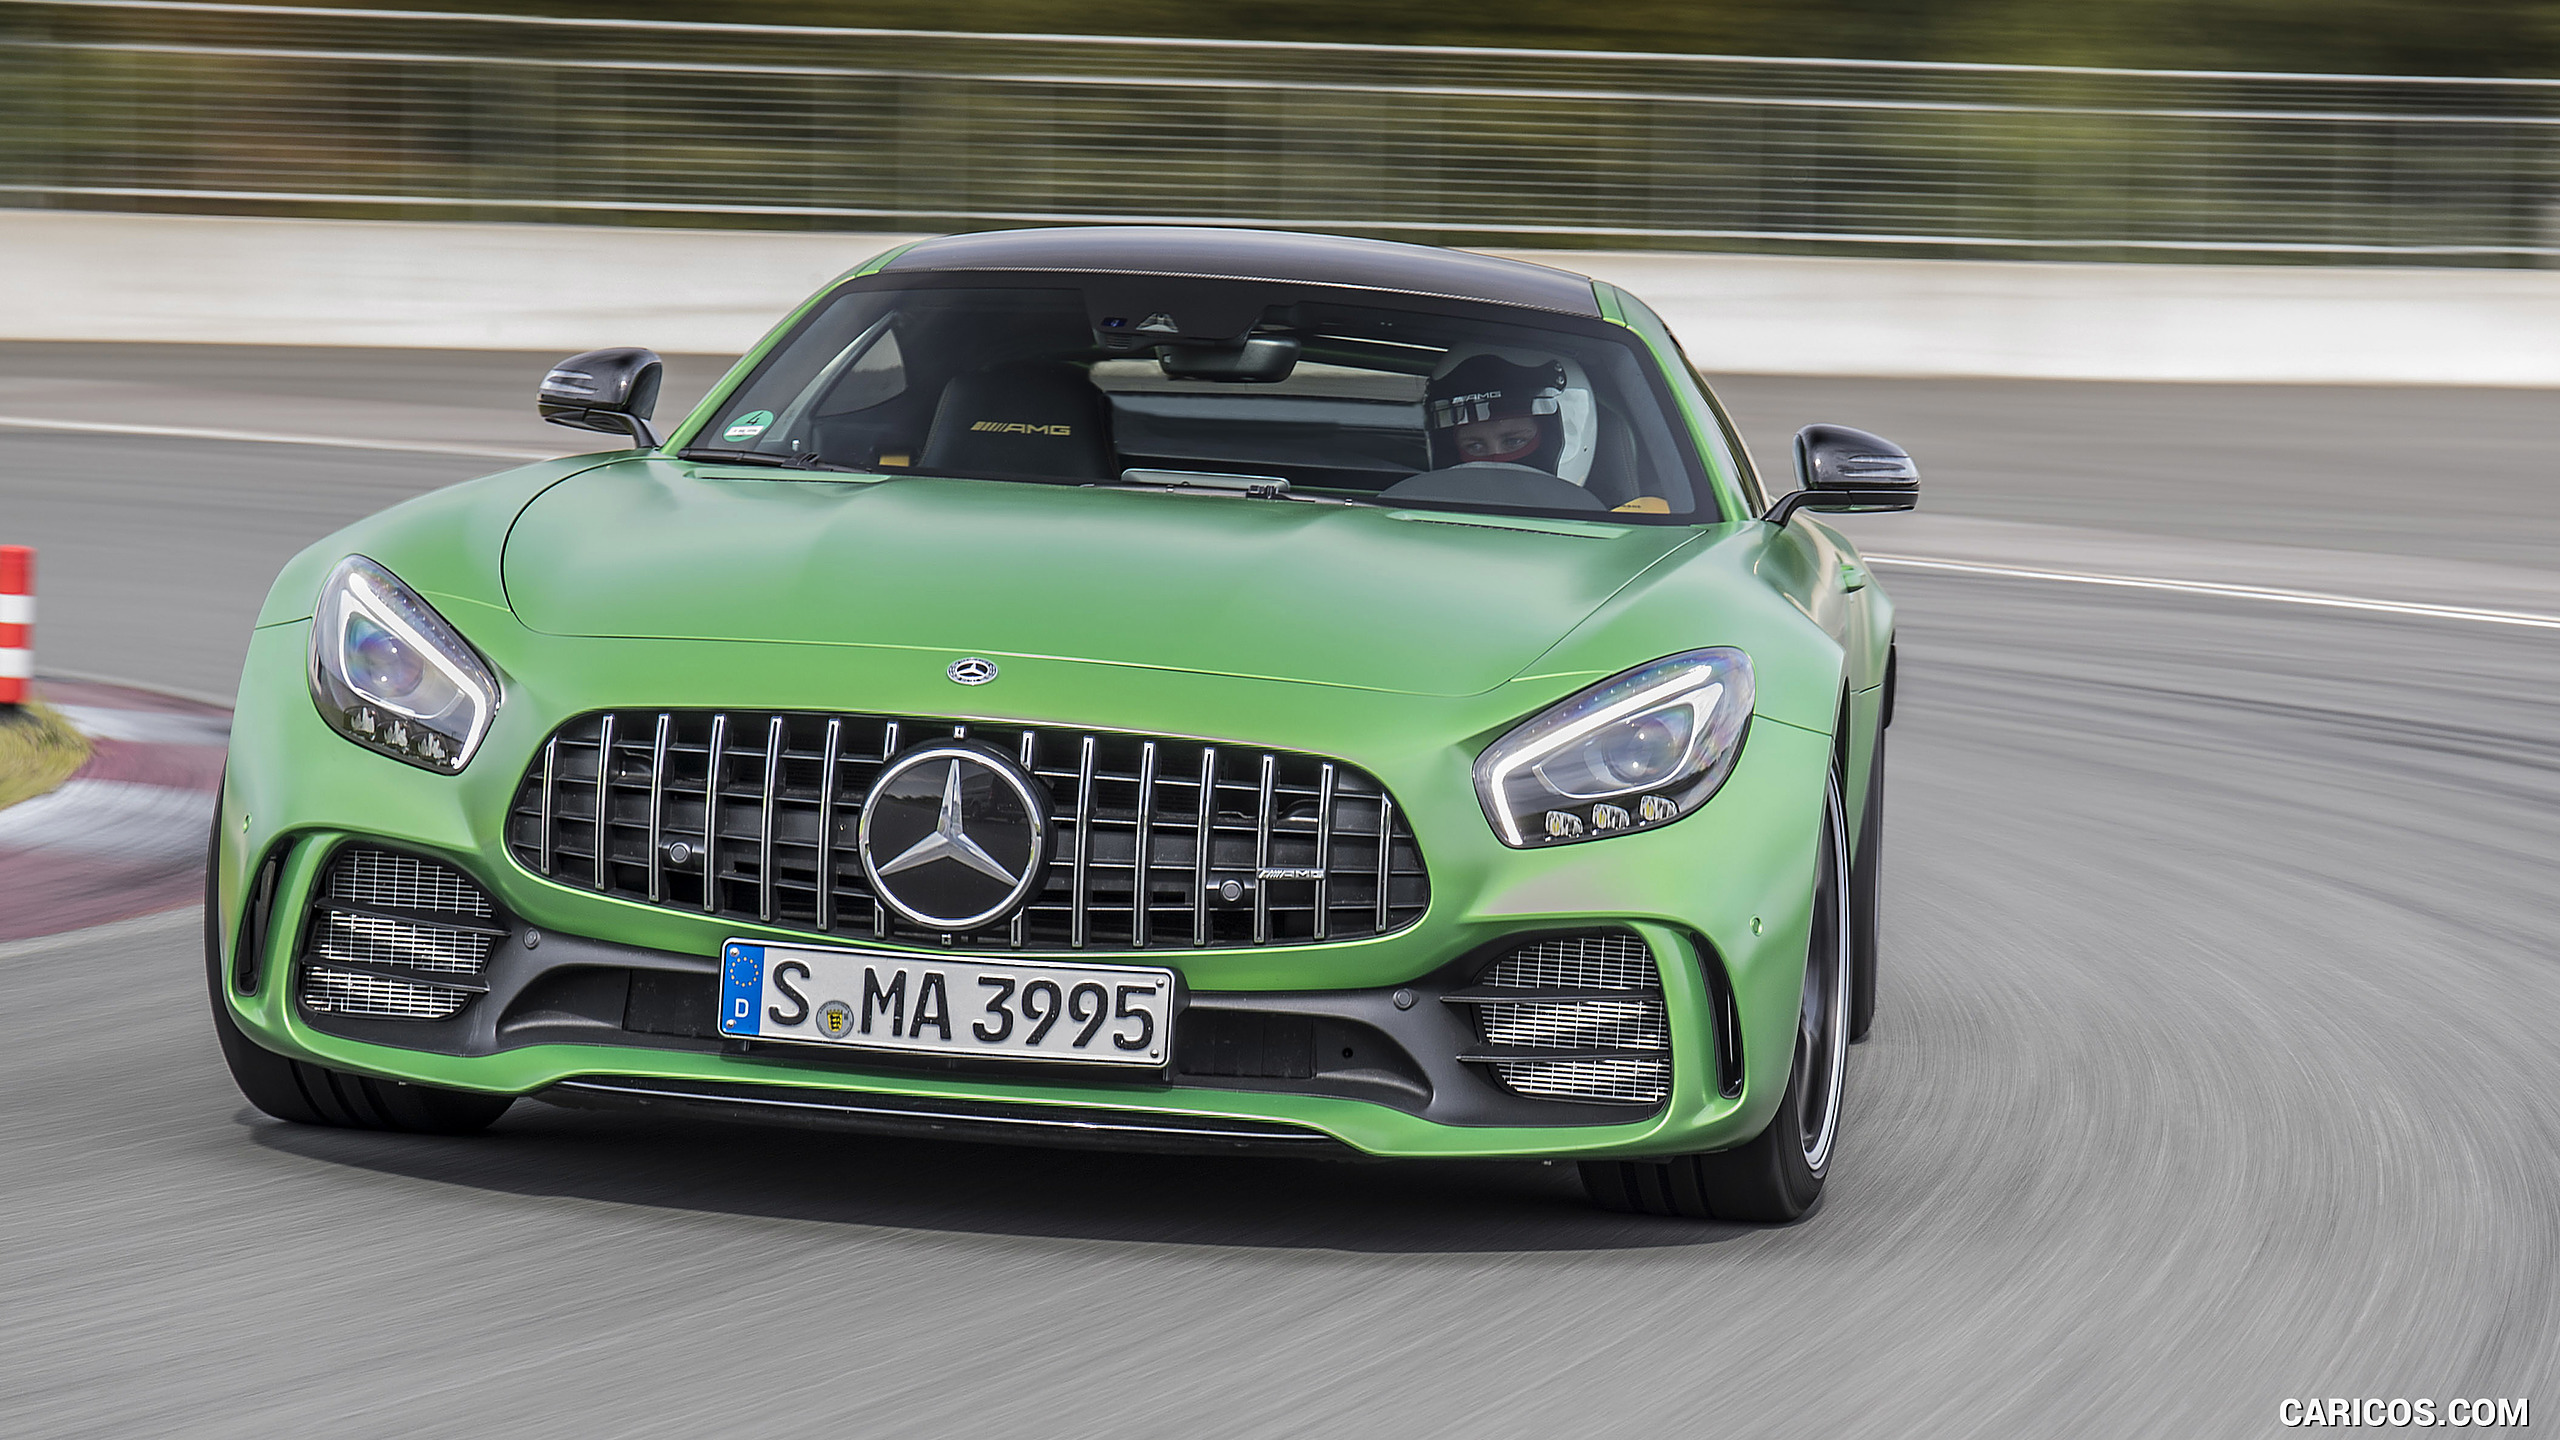 2017 Mercedes-AMG GT R Coupe - Front, #138 of 182